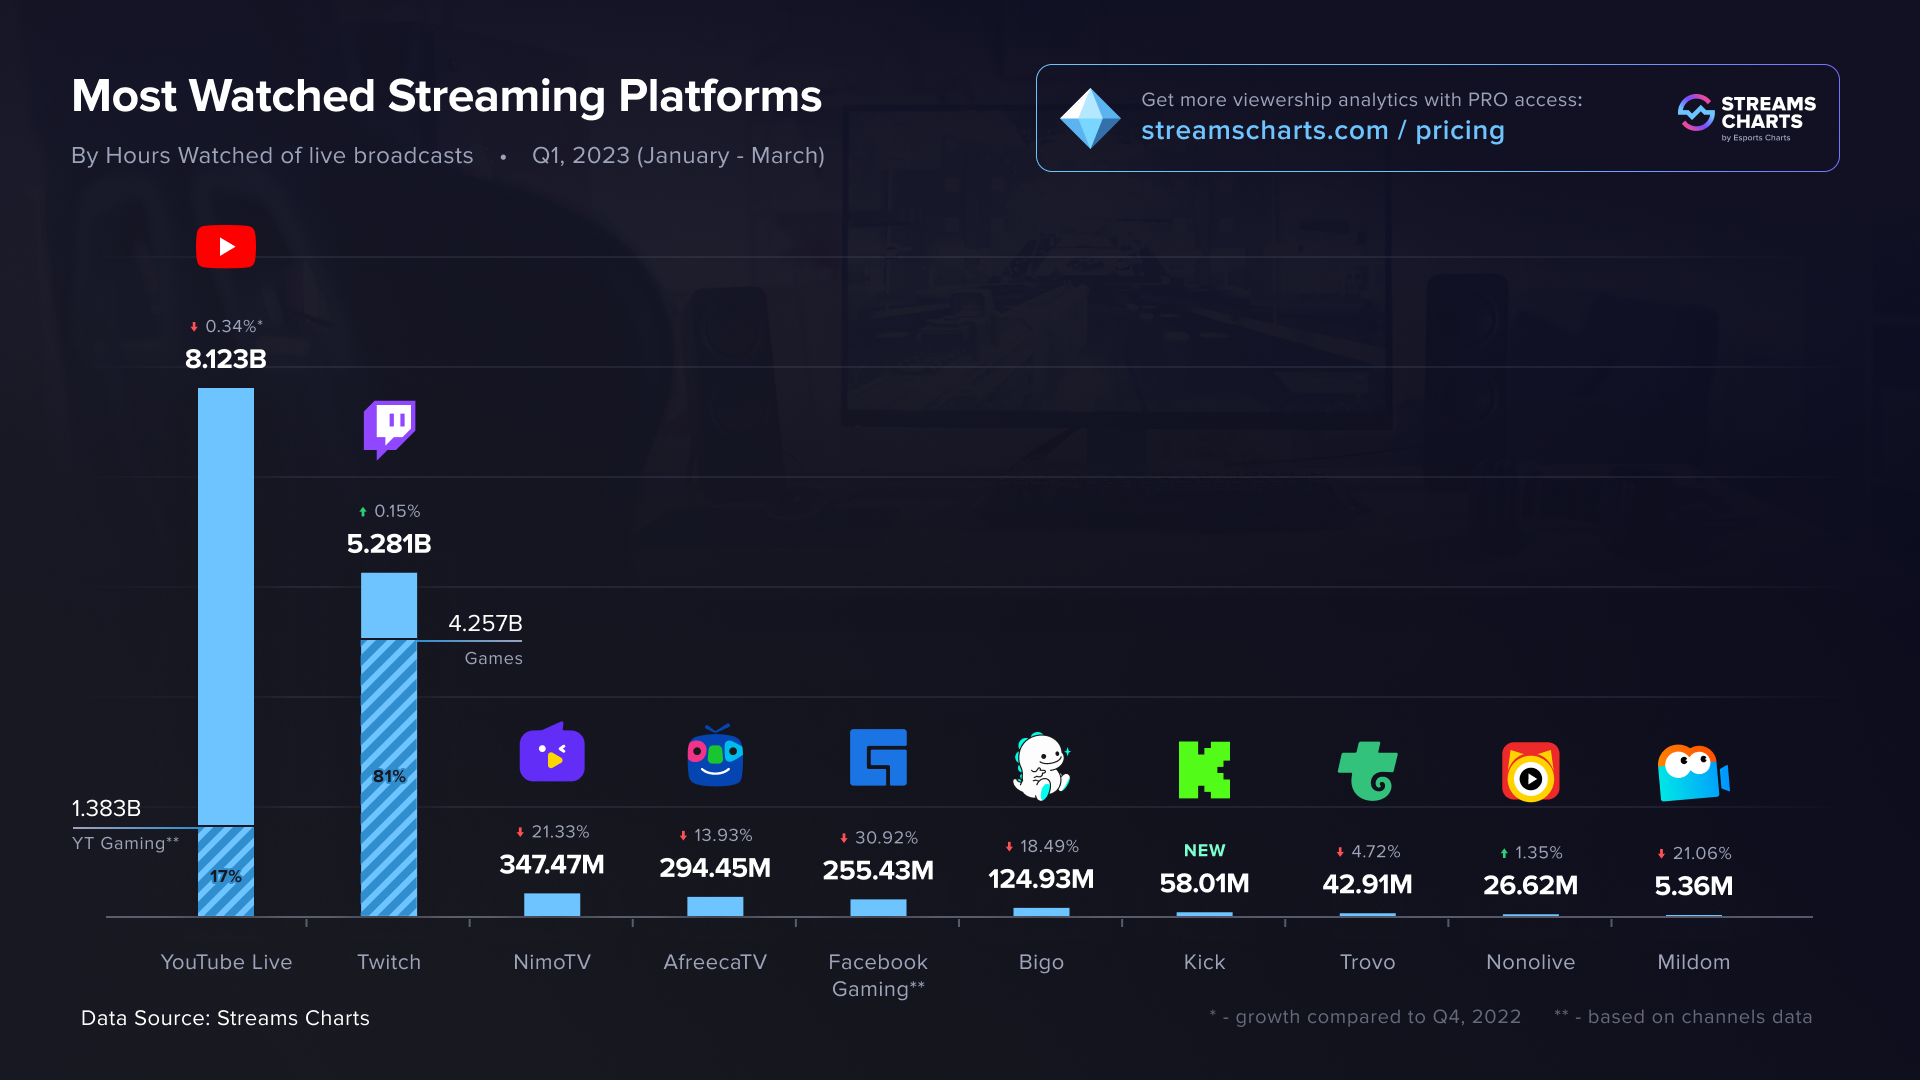 Social media statistics: Bar graph showing most watched streaming platforms by hours watched of live broadcasts in Q1 2023